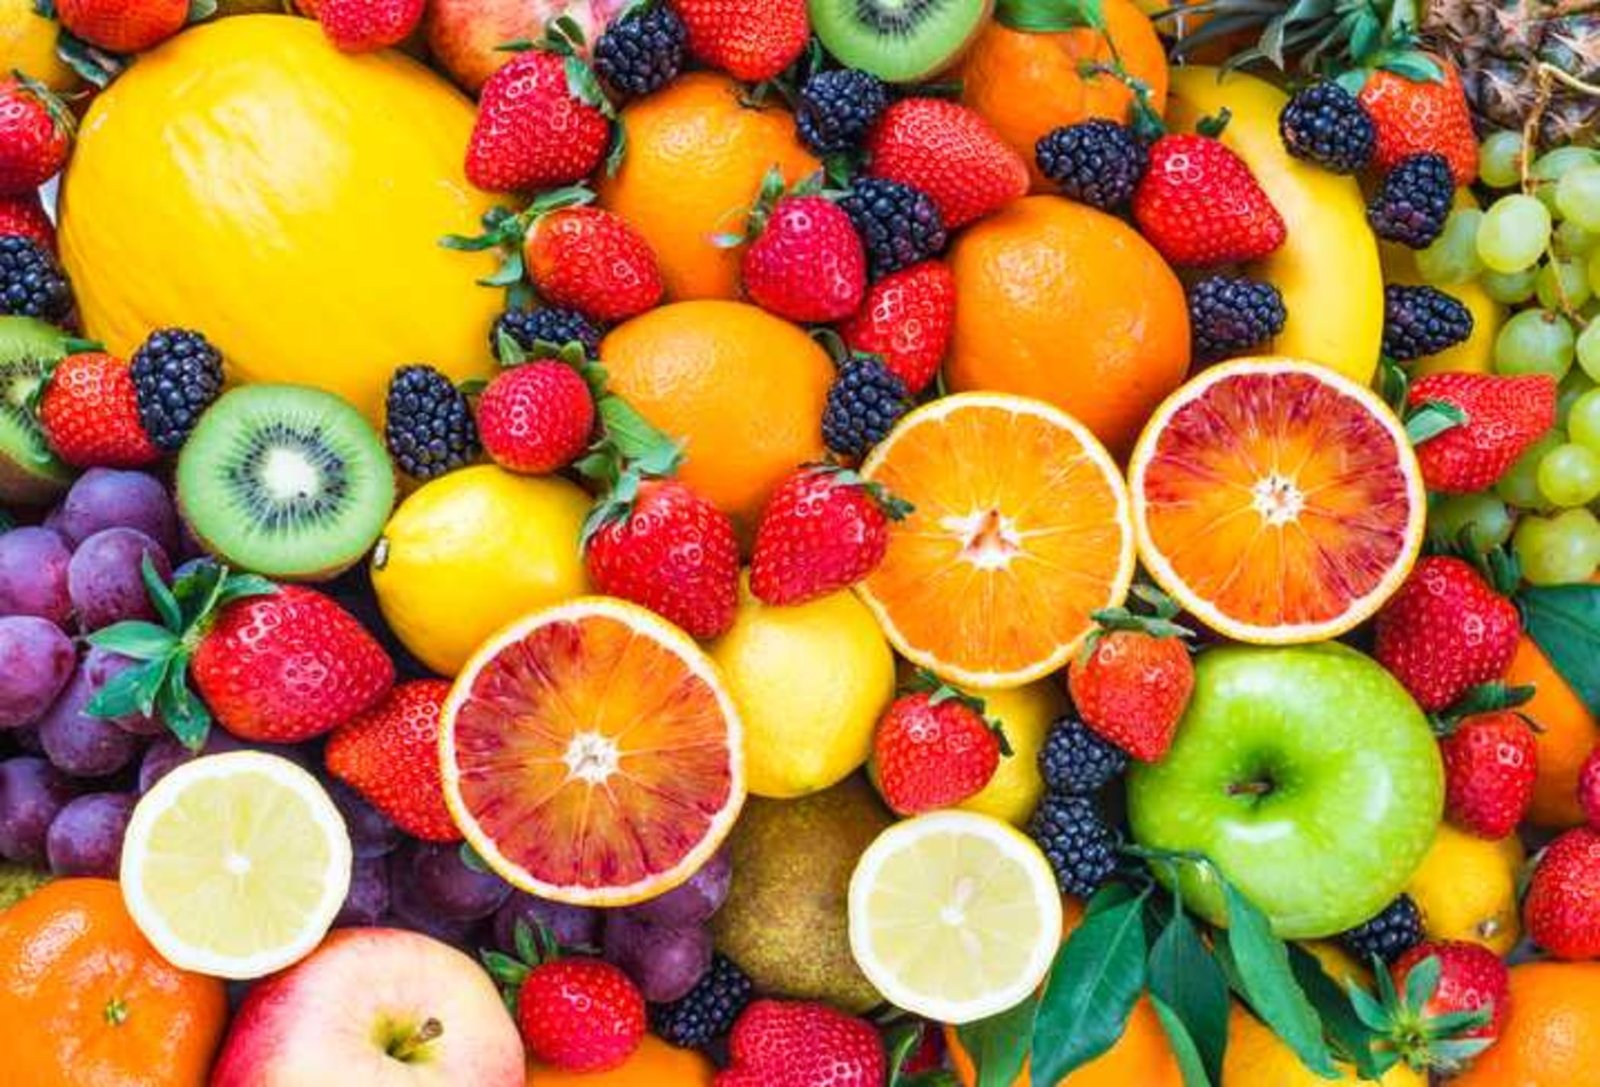 How these fruits can help you lose weight?